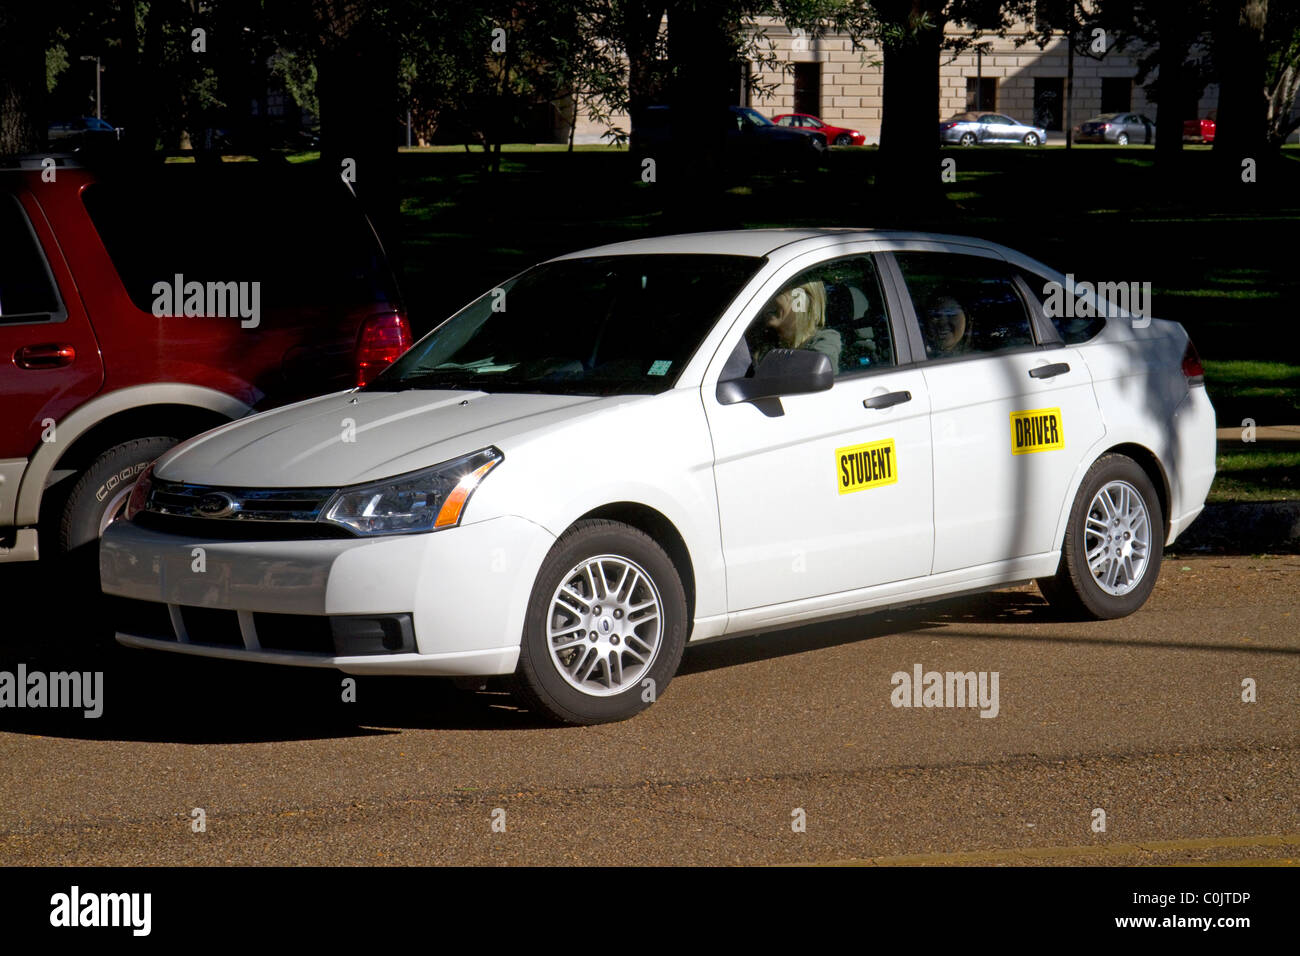 Drivers education car in Jackson, Mississippi, USA. Stock Photo